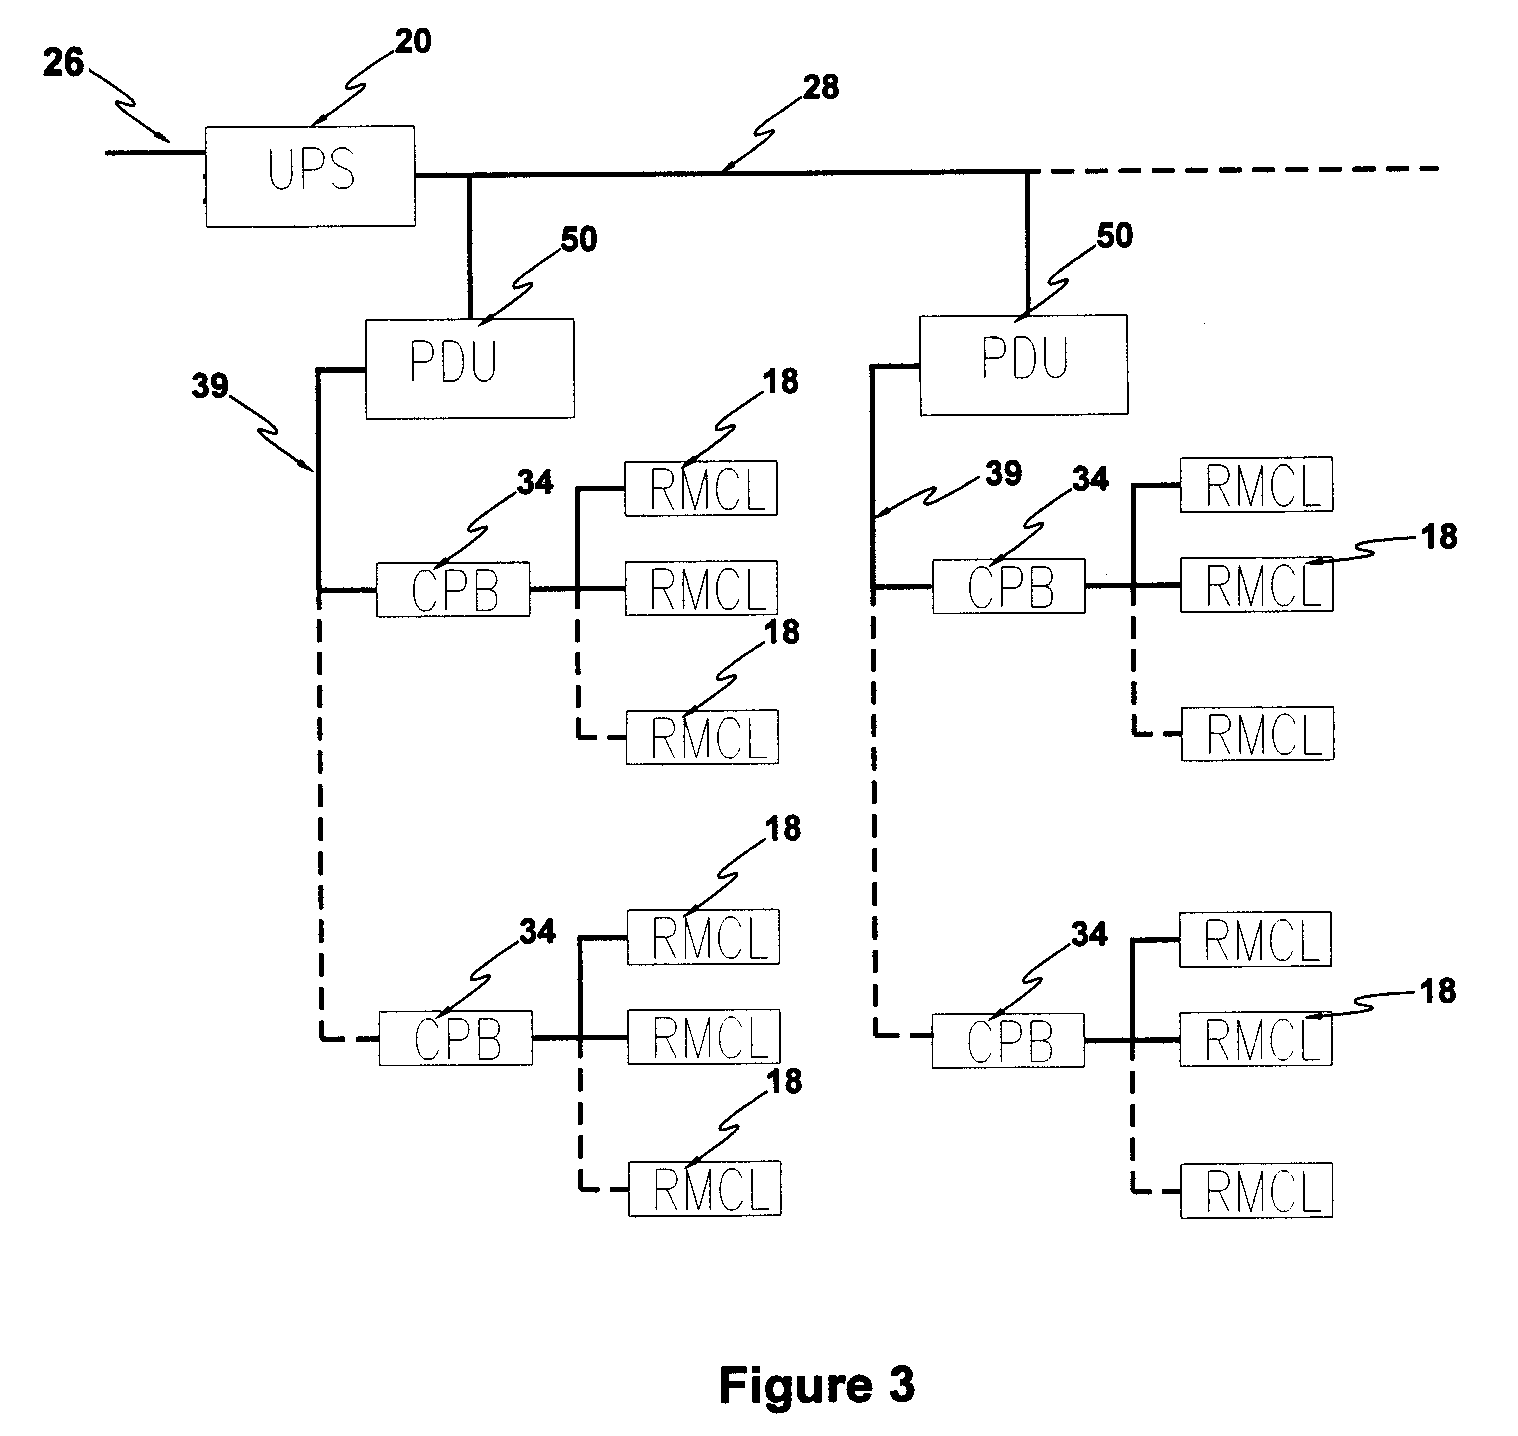 Distributed Electrical Power System for Computer Rooms